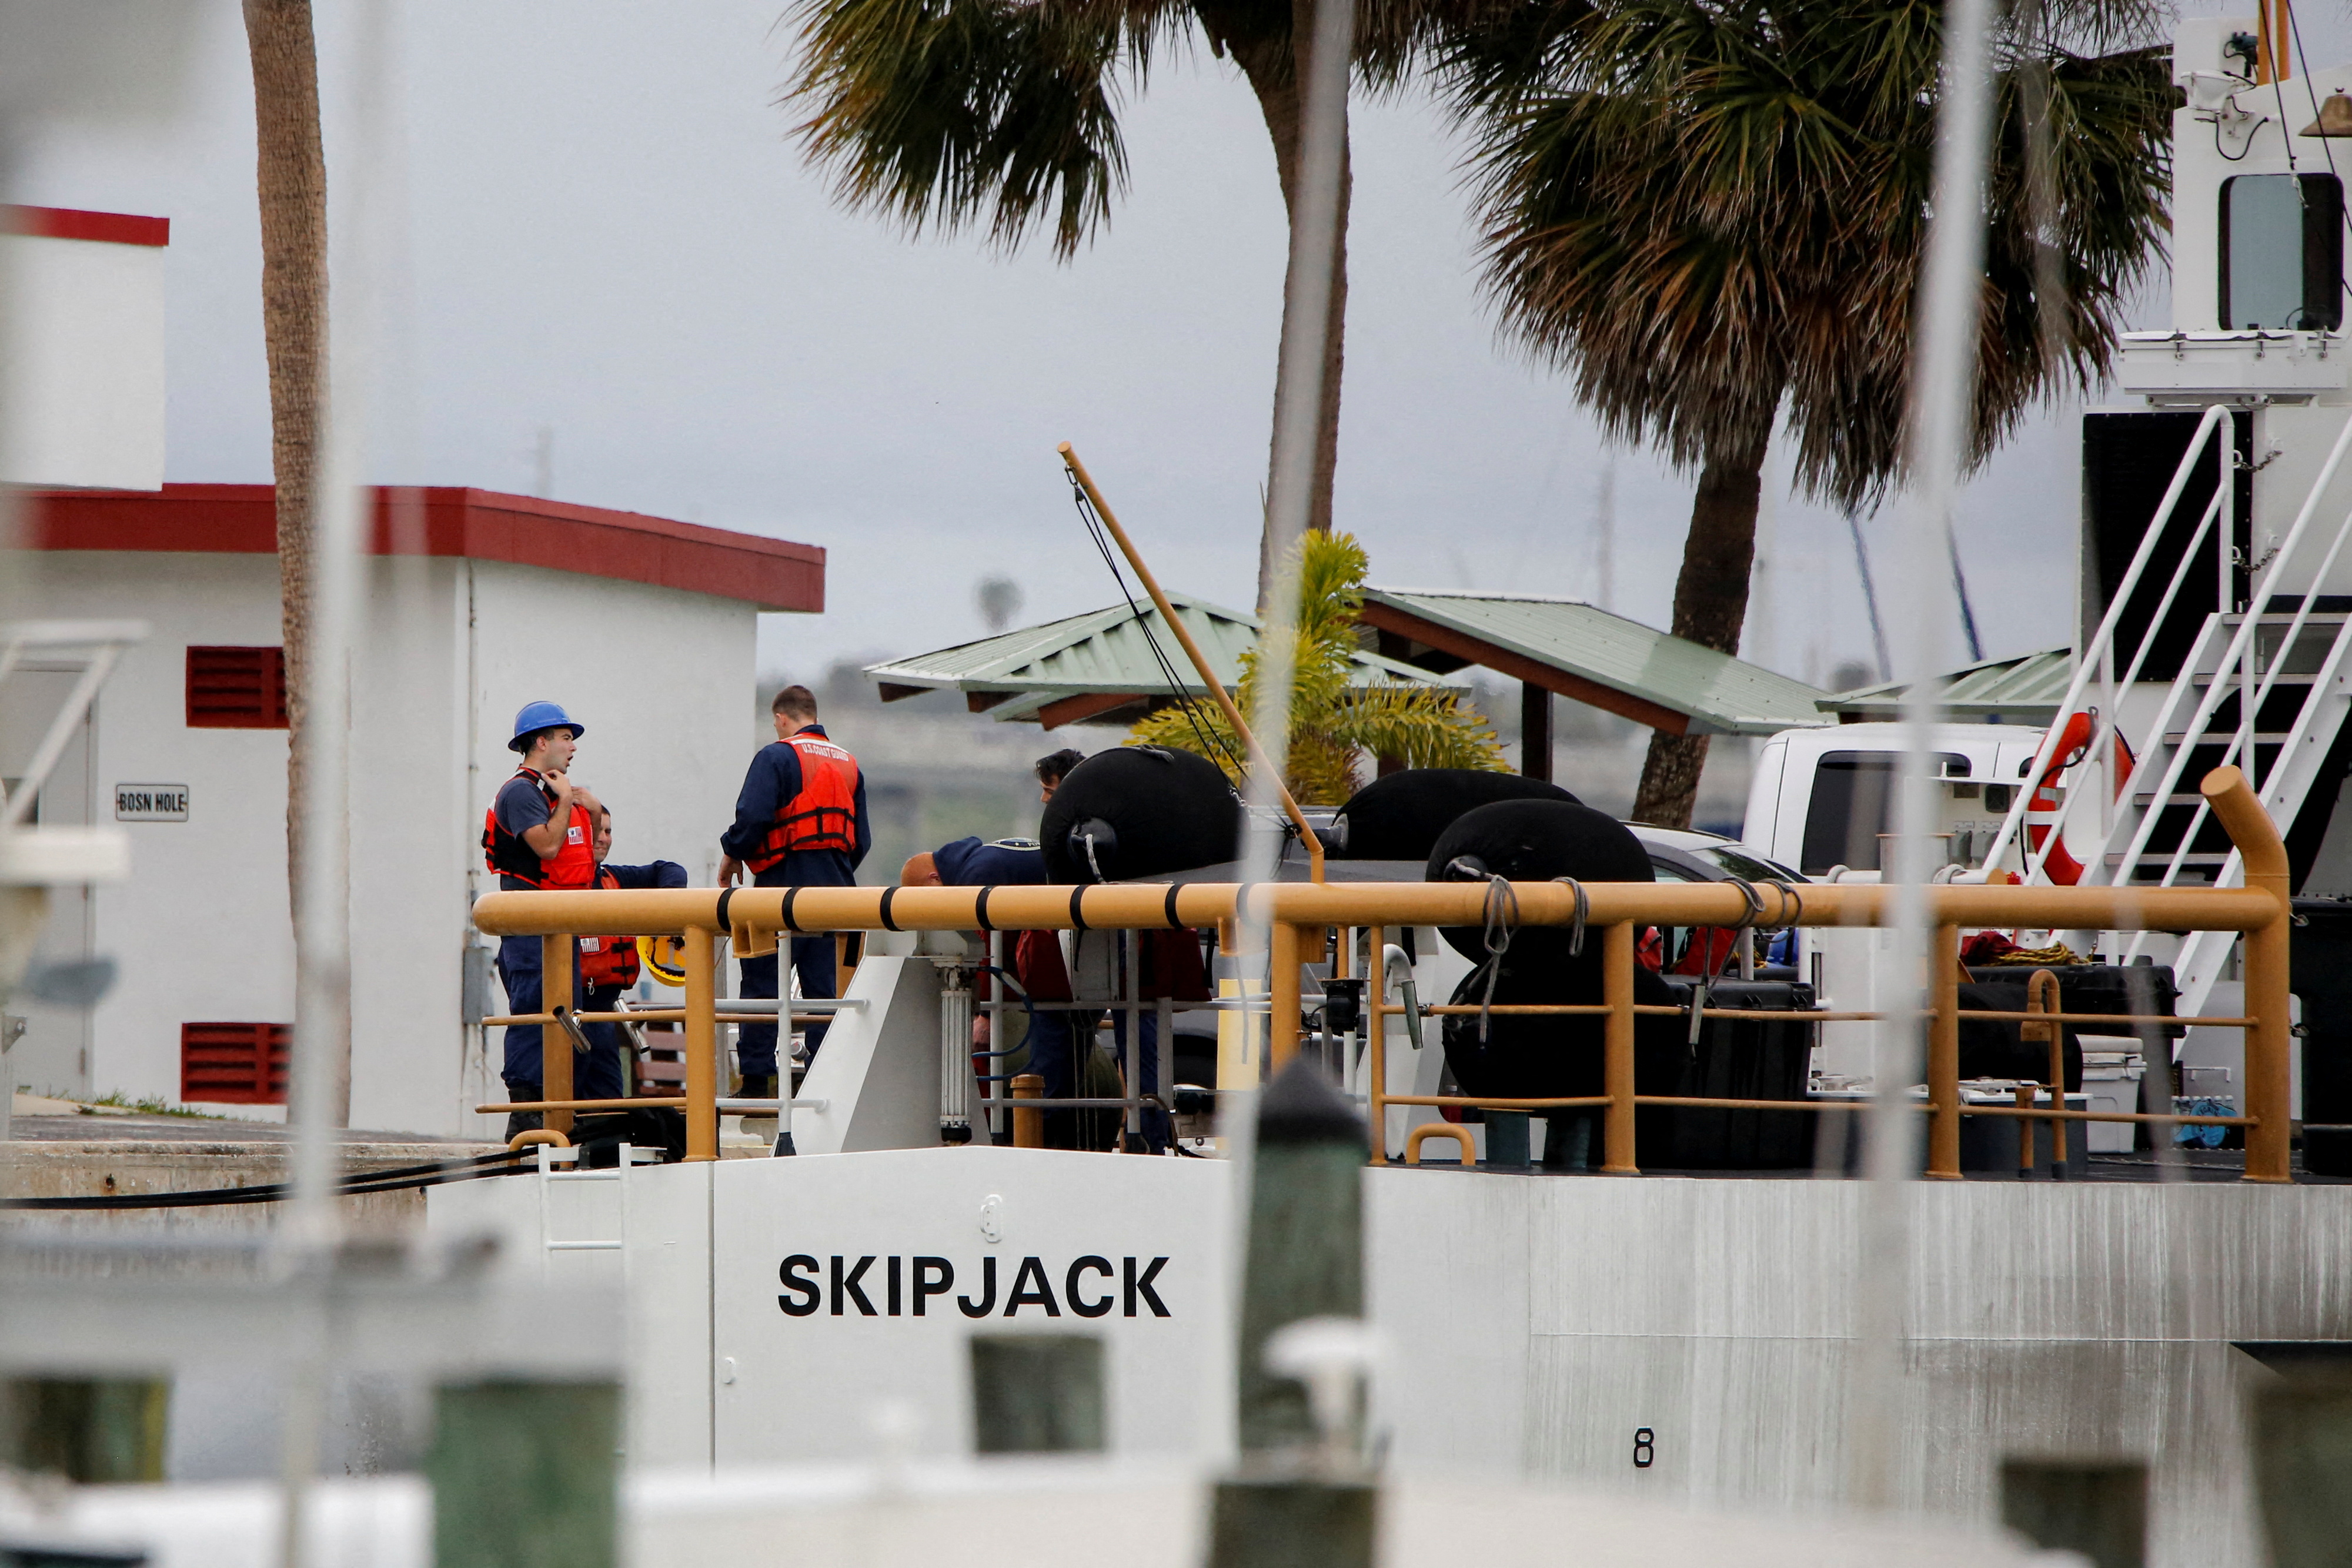 Members of the crew are seen onboard the U.S. Coast Guard Cutter Skipjack docked at the U.S. Coast Guard station, in Fort Pierce